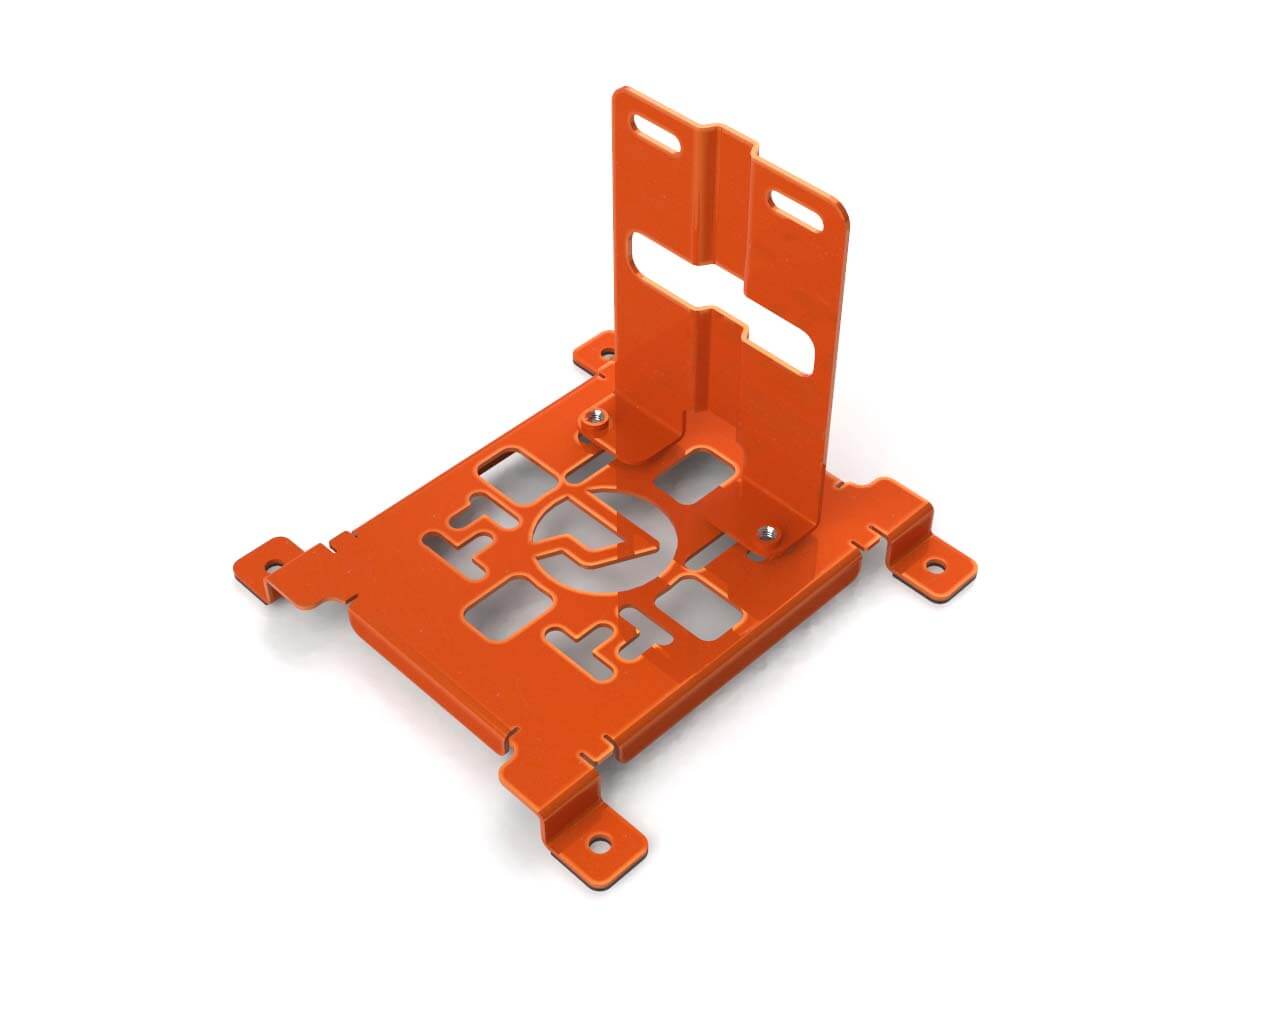 PrimoChill SX CTR2 Spider Mount Bracket Kit - 120mm Series - PrimoChill - KEEPING IT COOL